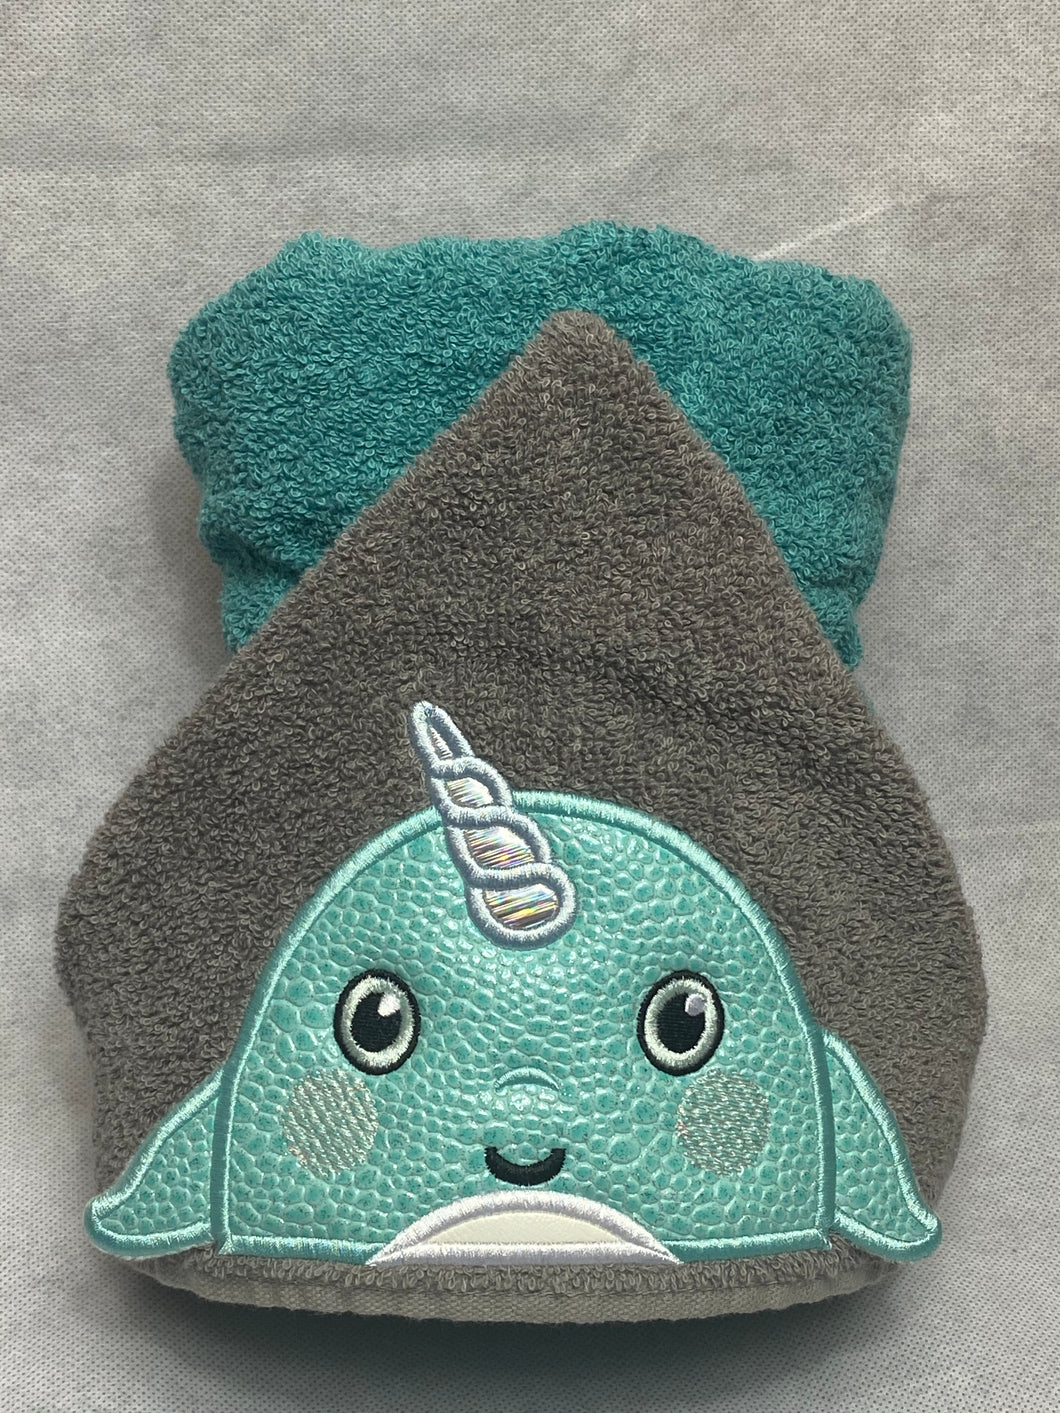 Narwhal character hooded towel